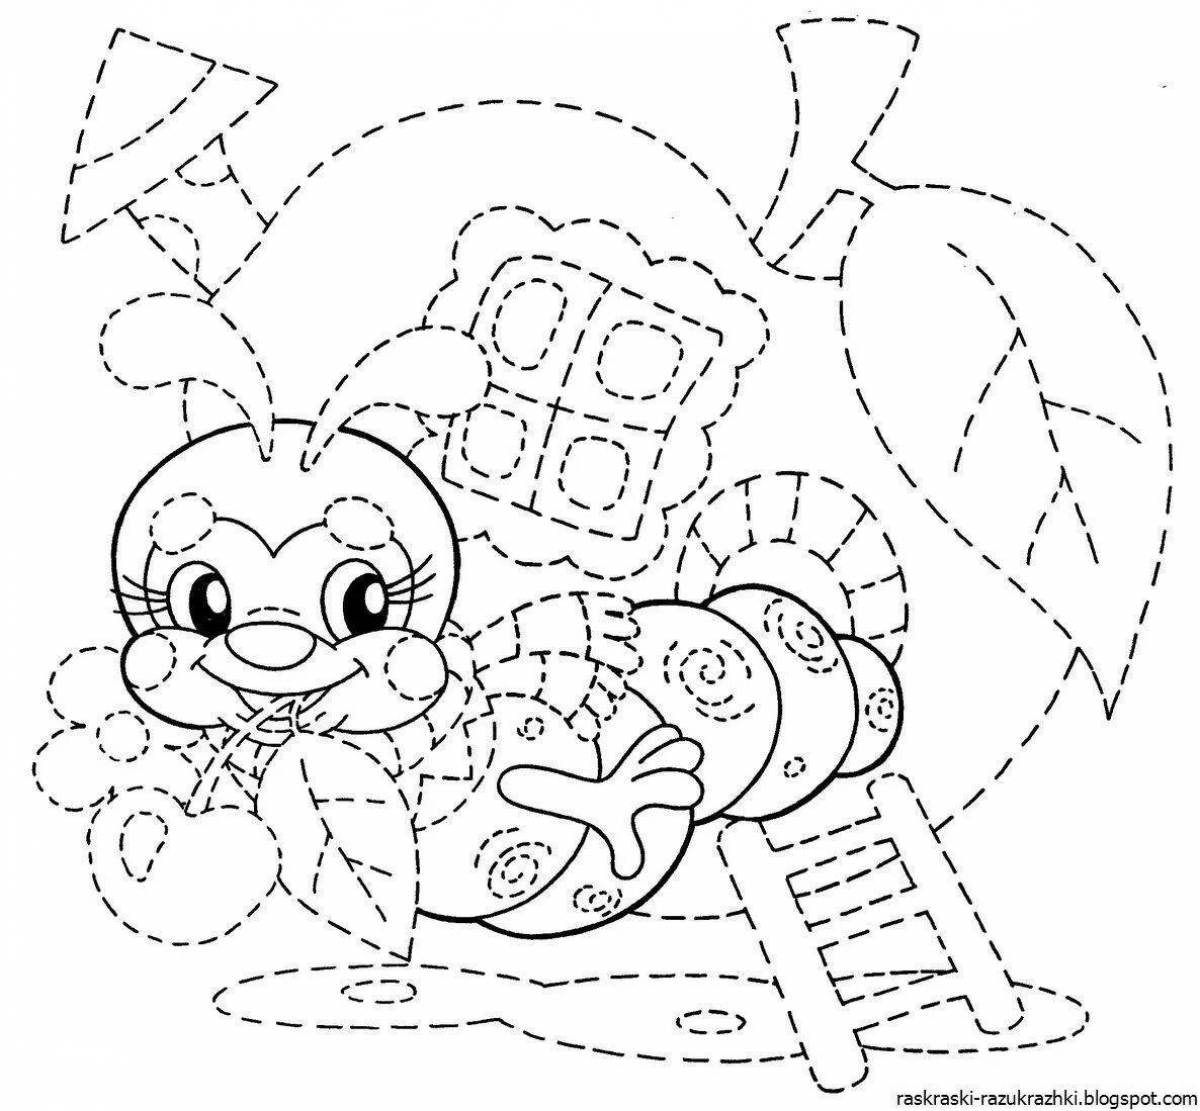 Delightful coloring book for children 7 years old